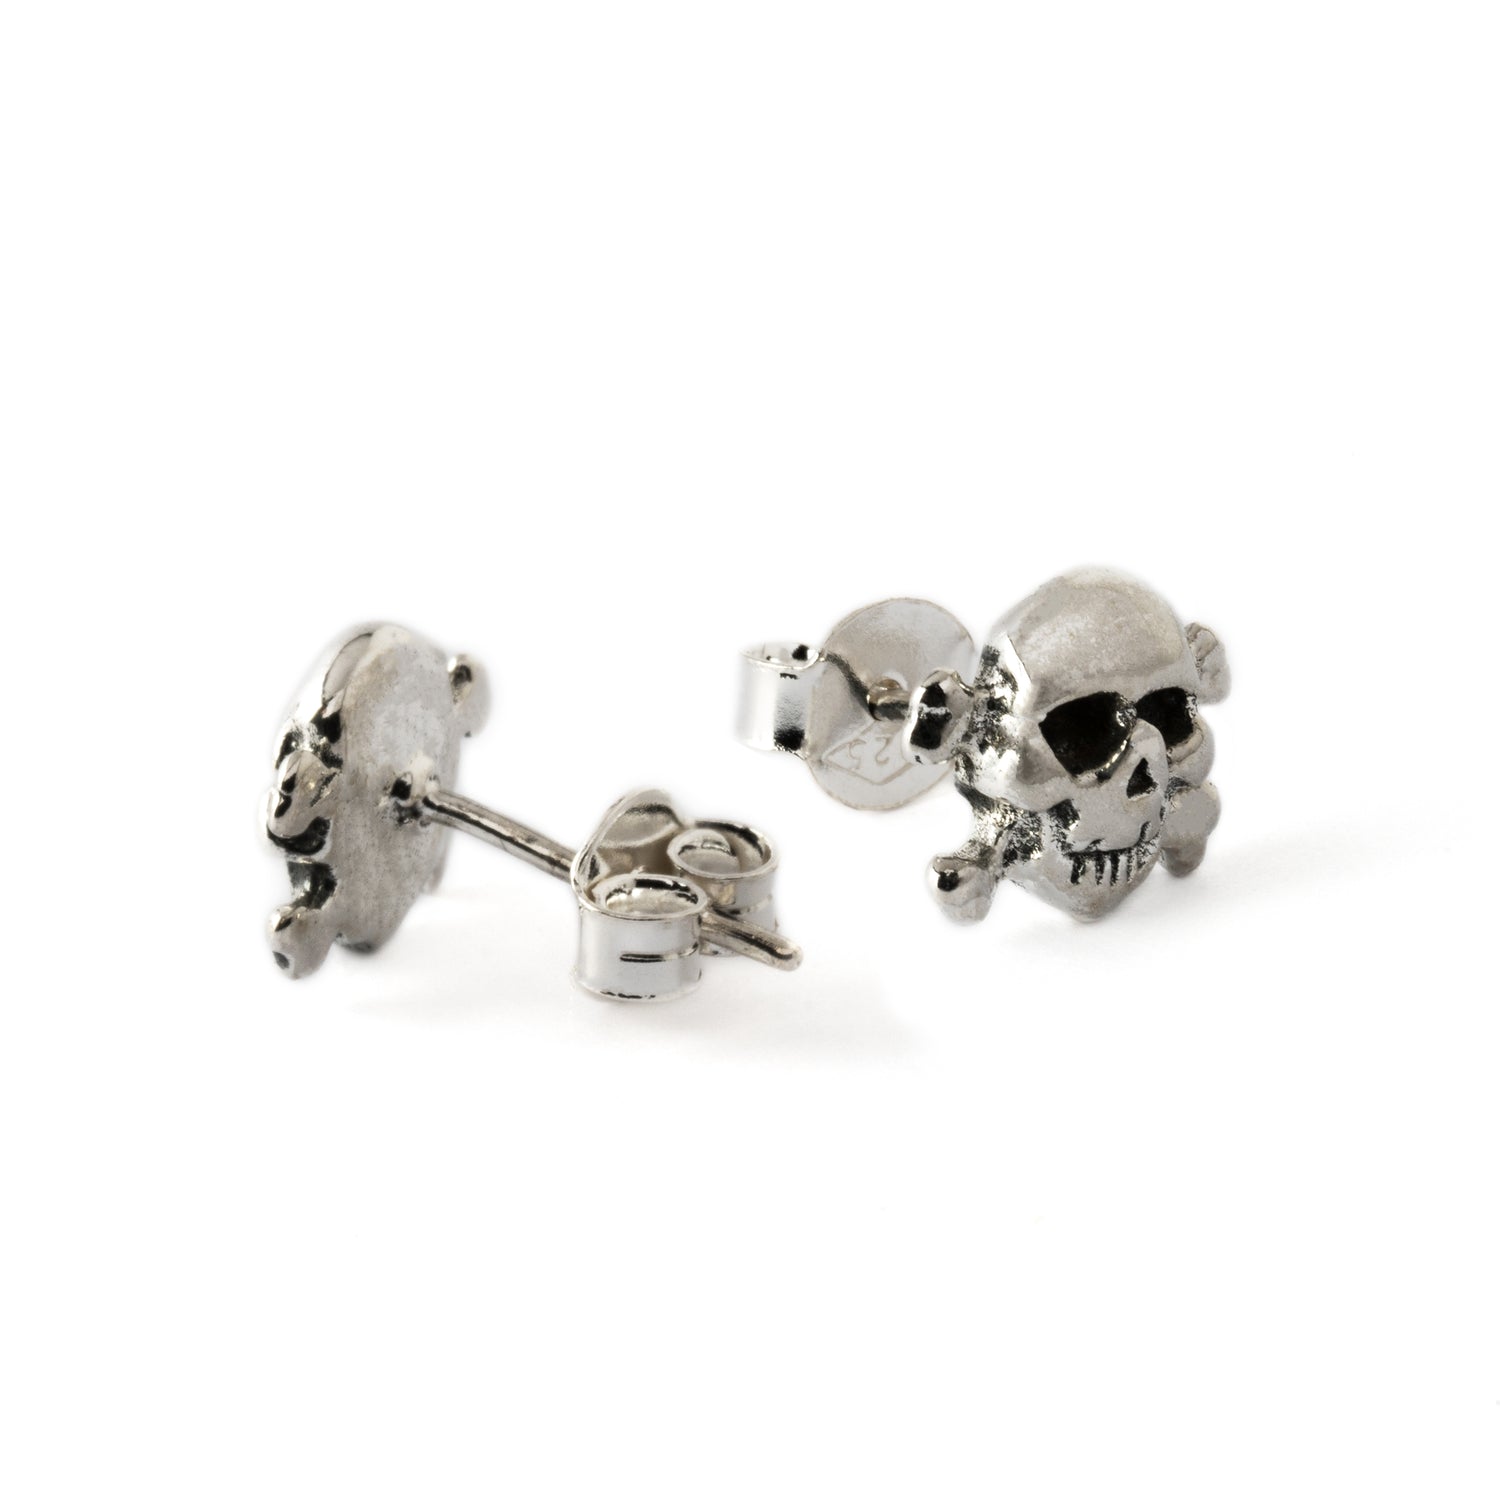 pair of silver pirate stud earrings back and side view